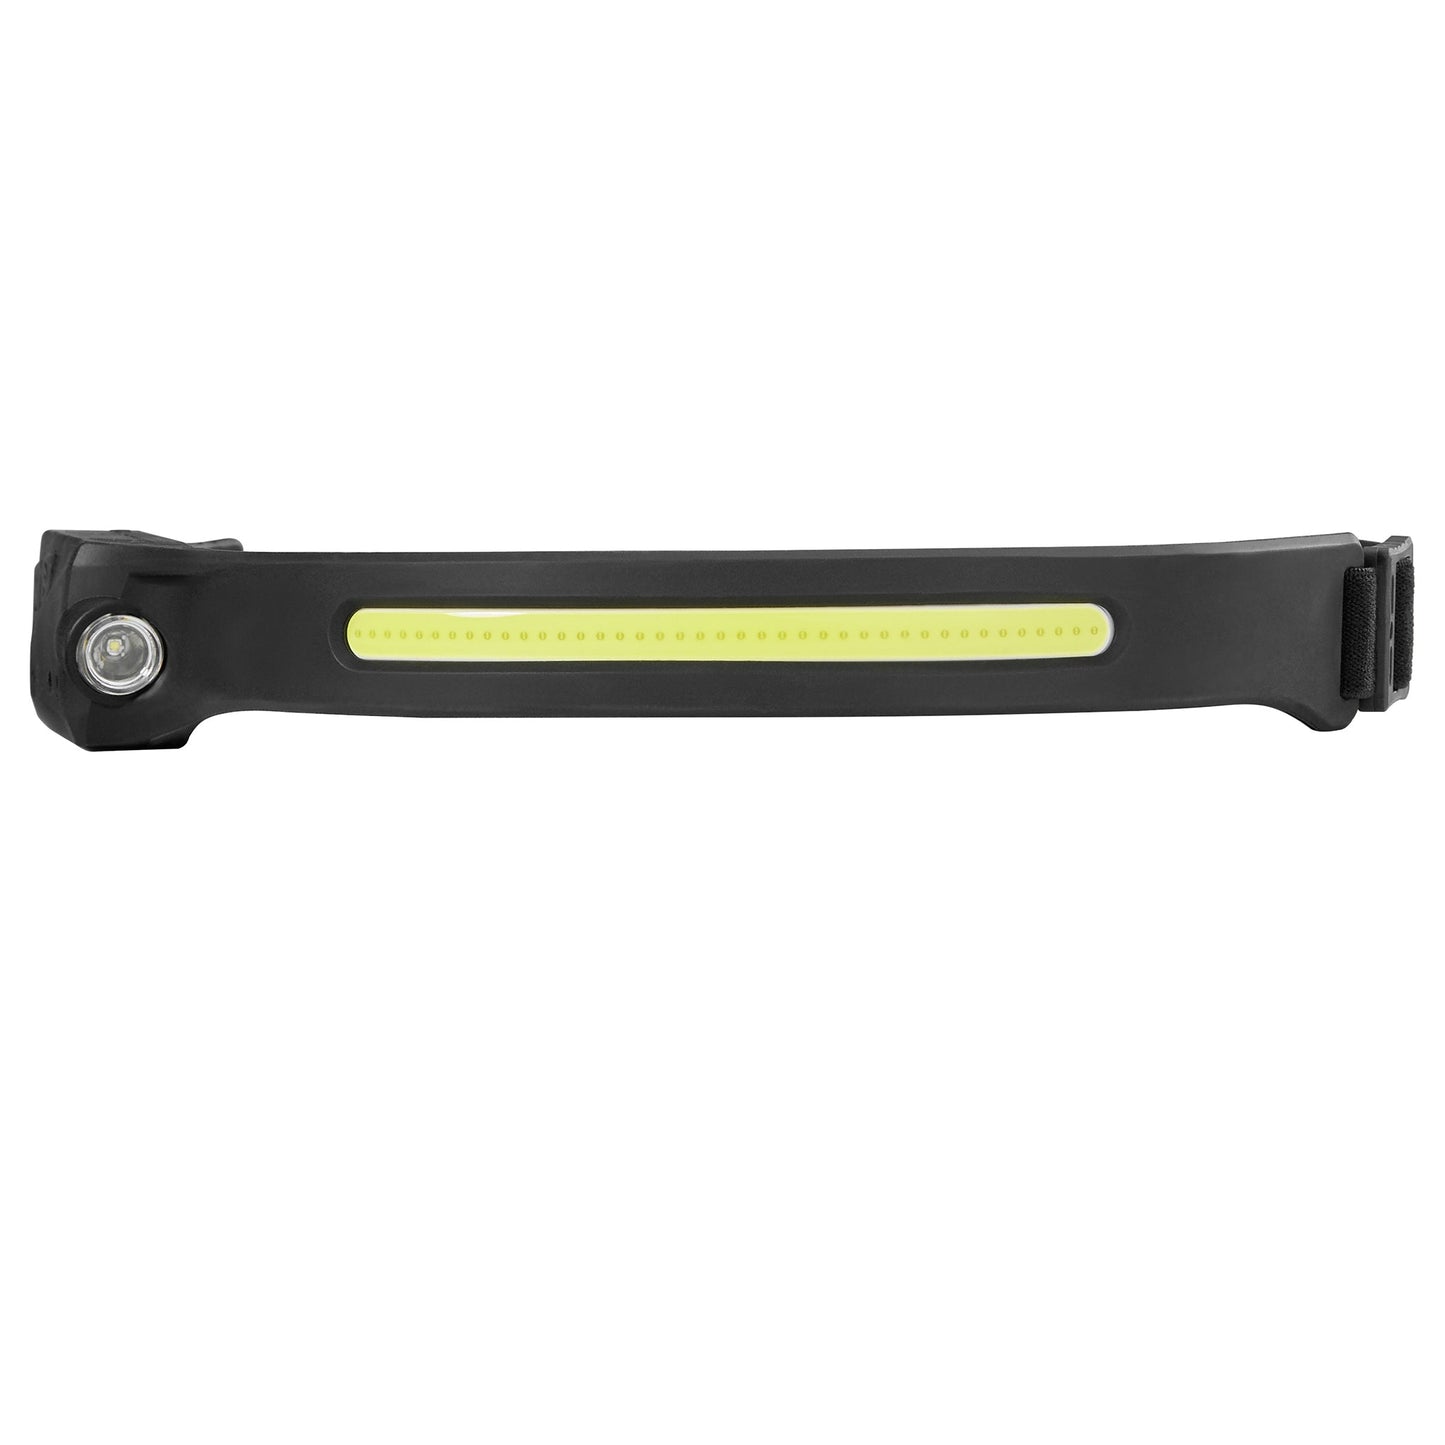 Headlamp with front light strip and lateral spot light incl. motion sensor for operation